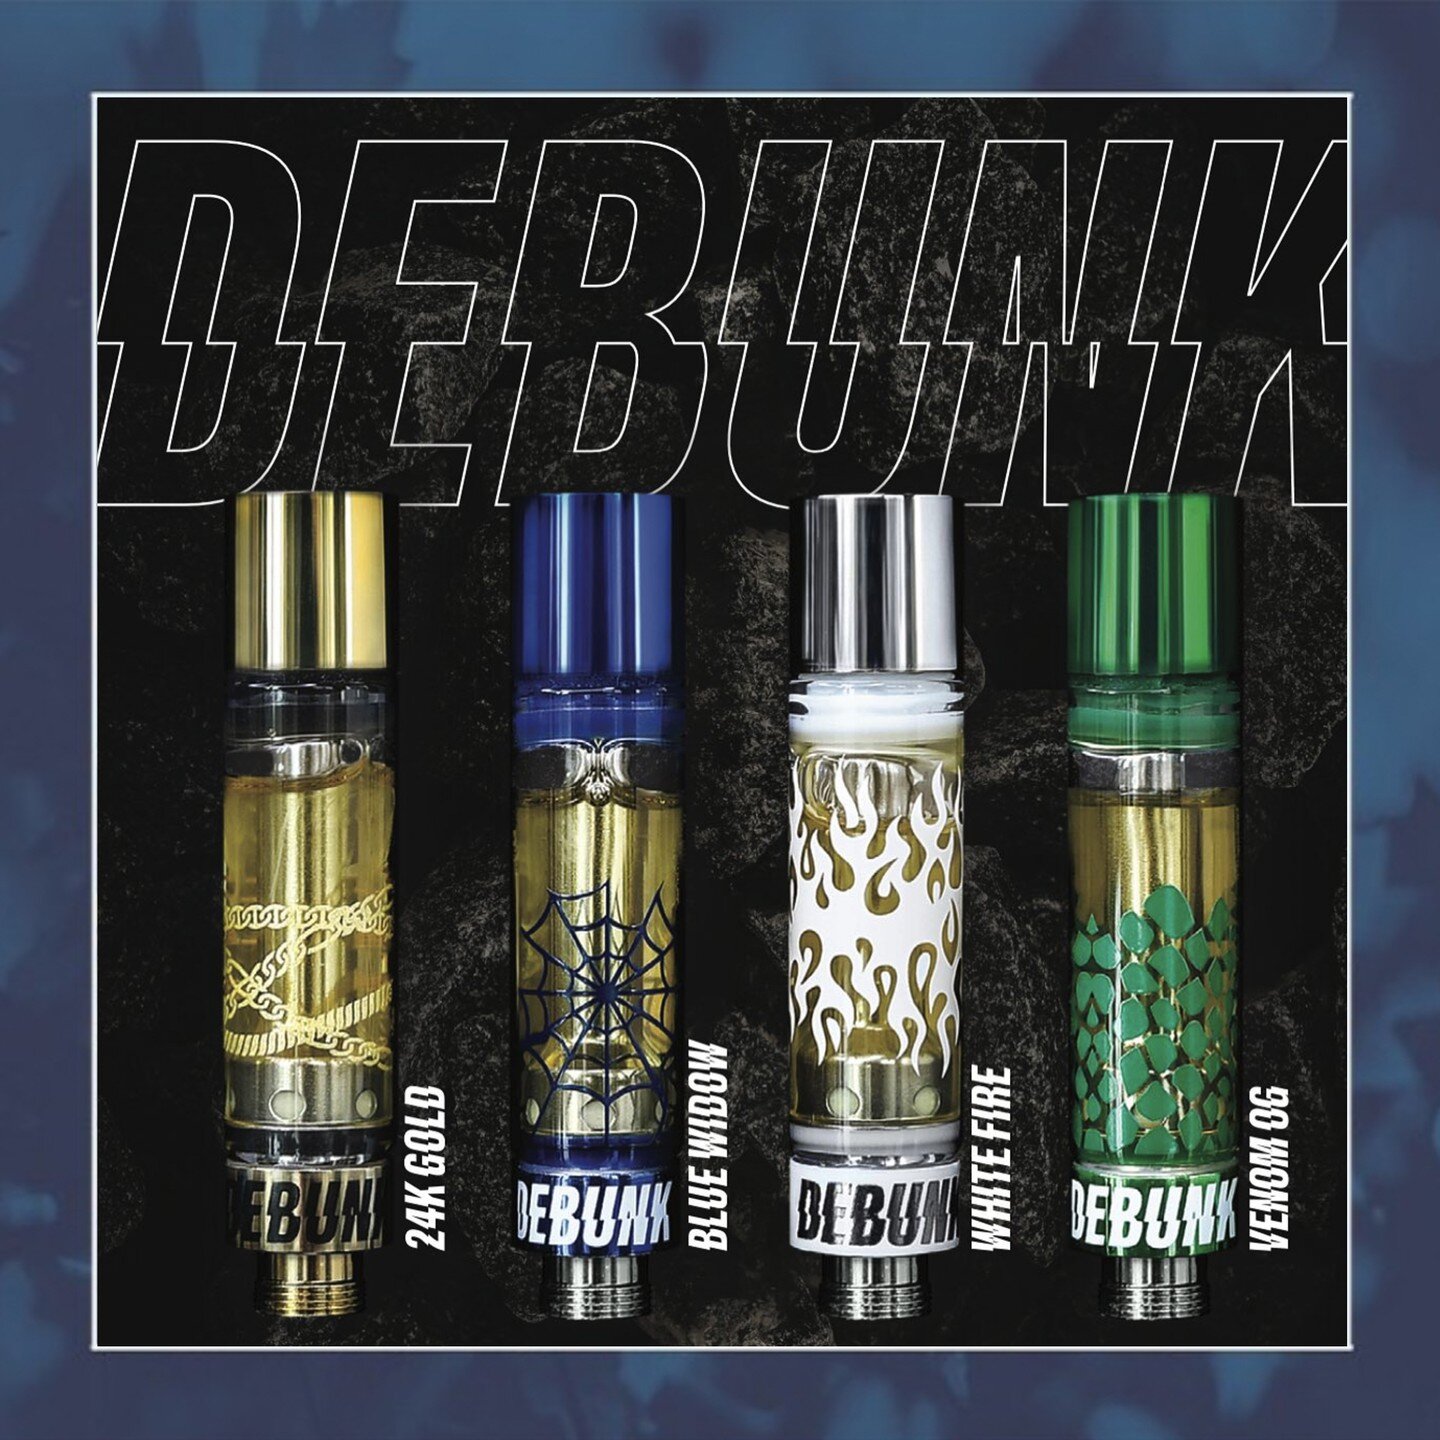 IRCC x @debunkweed

Debunk&rsquo;s vapes are meticulously made and rigorously tested for an elevated experience with next-level cartridge designs and dialed-in flavour formulations.

Debunk&rsquo;s vapes are a blend of 95% distillate and 5% full spec